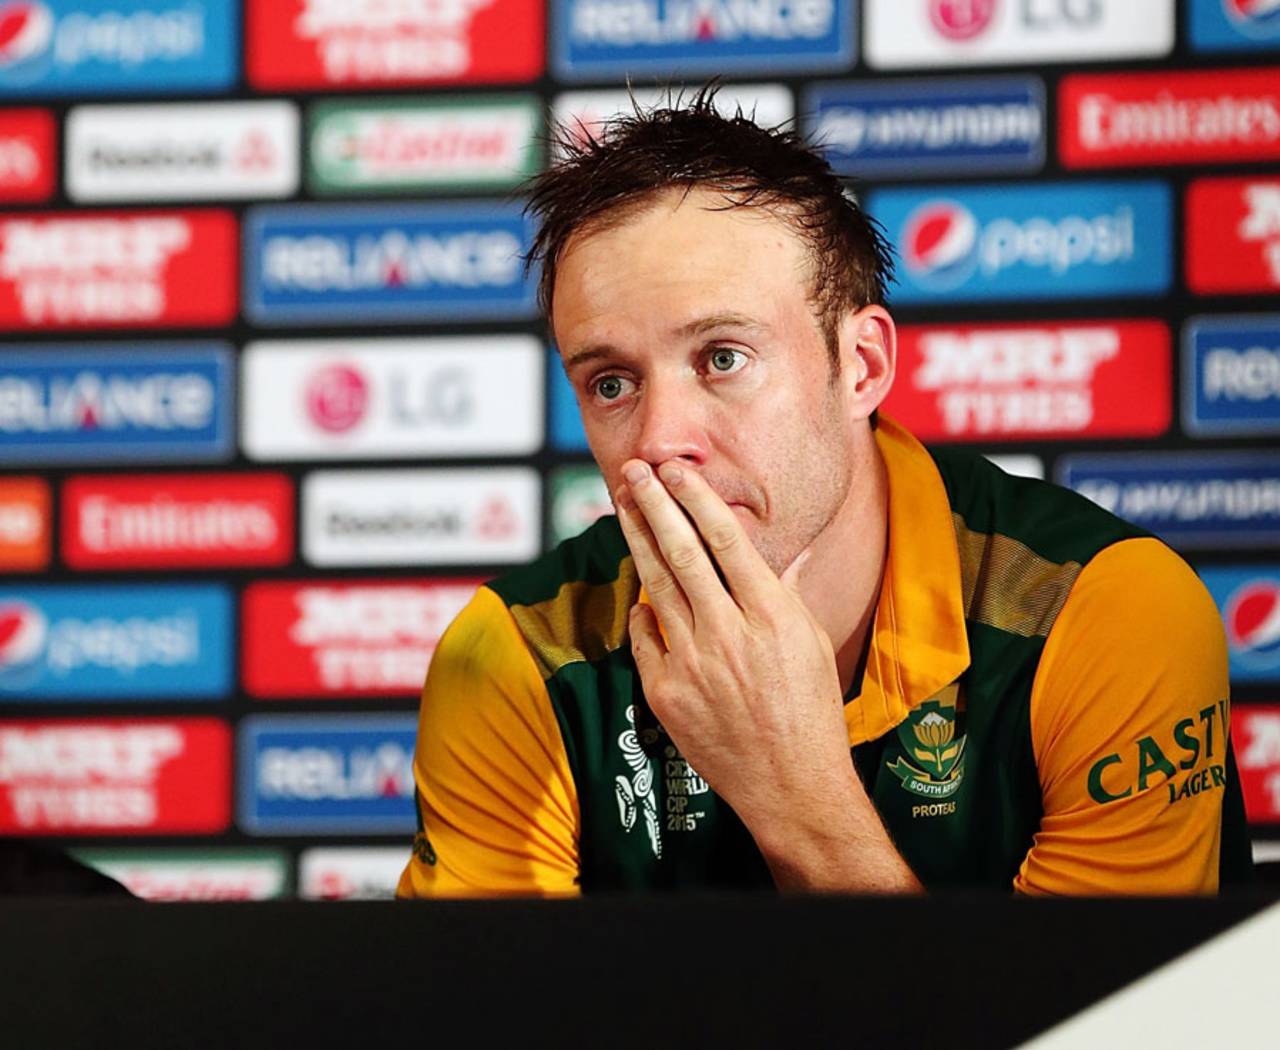 AB de Villiers wears a despondent look during the press conference, New Zealand v South Africa, World Cup 2015, 1st semi-final, Auckland, March 24, 2015